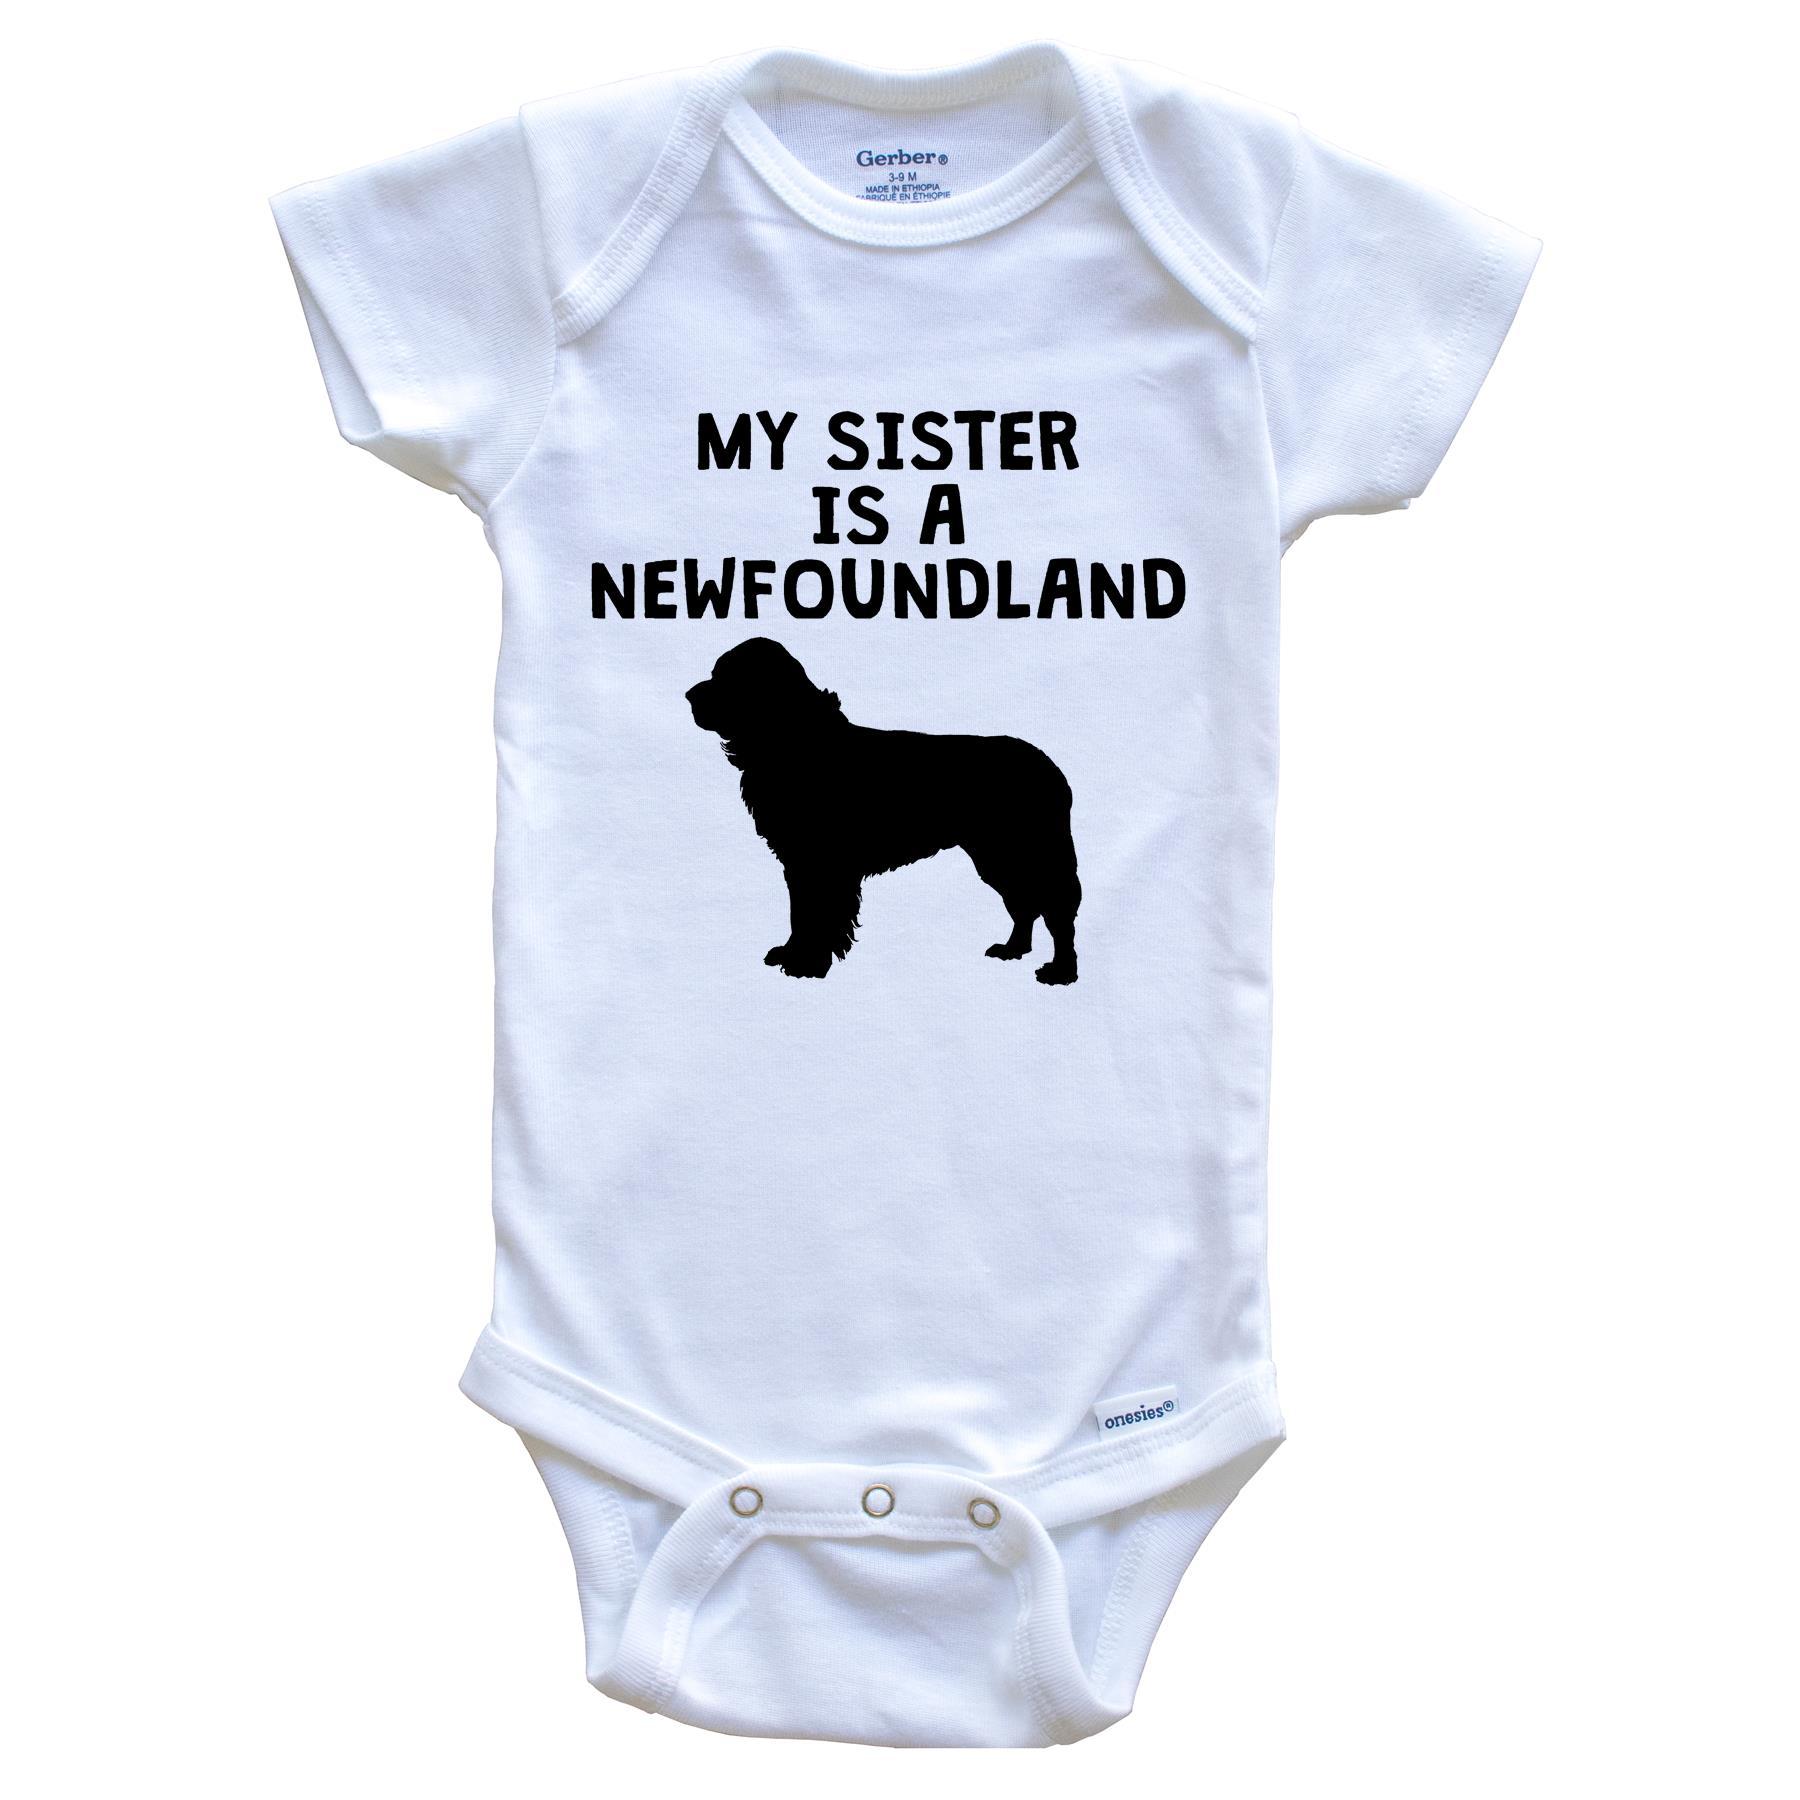 My Sister Is A Newfoundland Baby Onesie